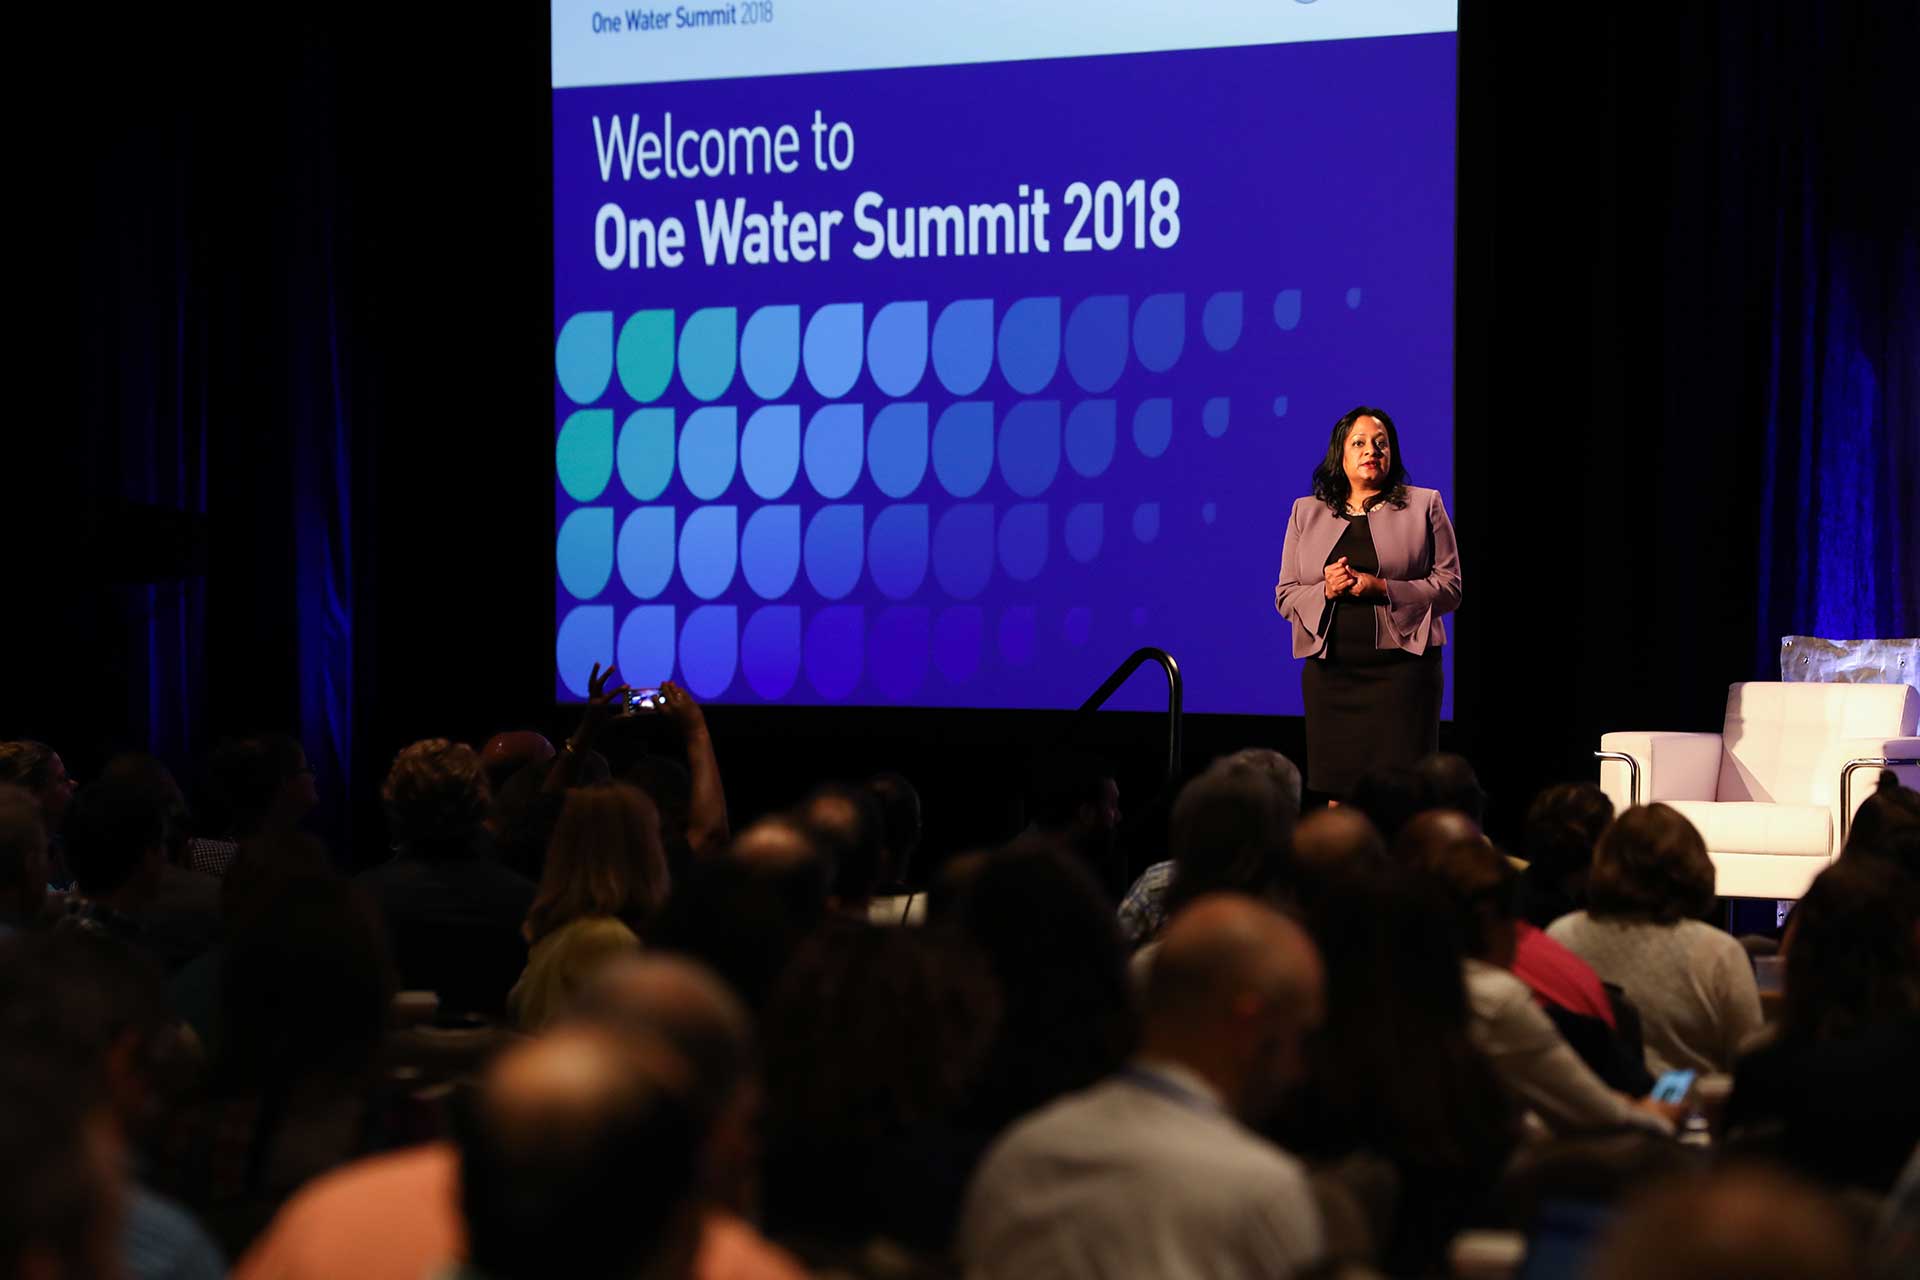 water alliance, one water summit, nocci, event, event planning, event coordinating, event management, event logistics, event marketing, conferences, workshops, seminars, meetings, festivals